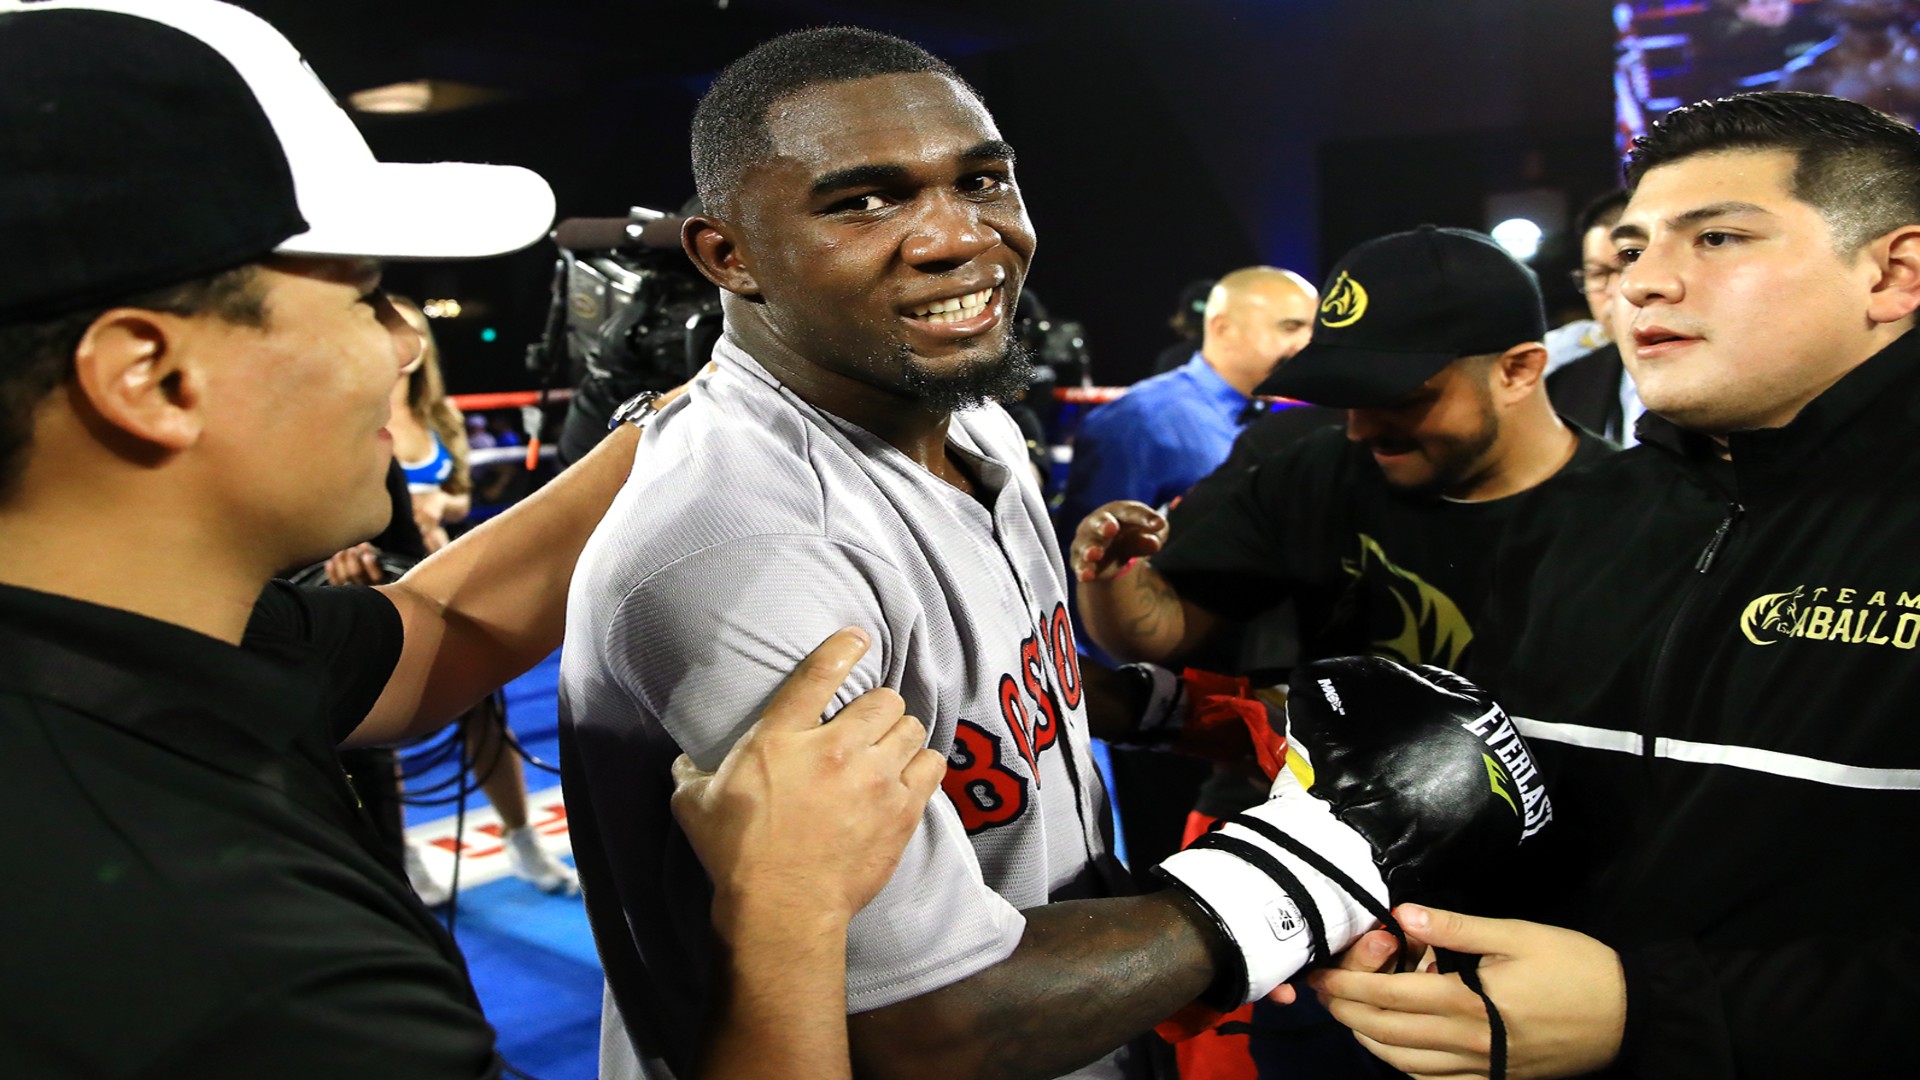 Carlos Adames puts Dominican boxing on his back, sends message to U.S. tourists ...